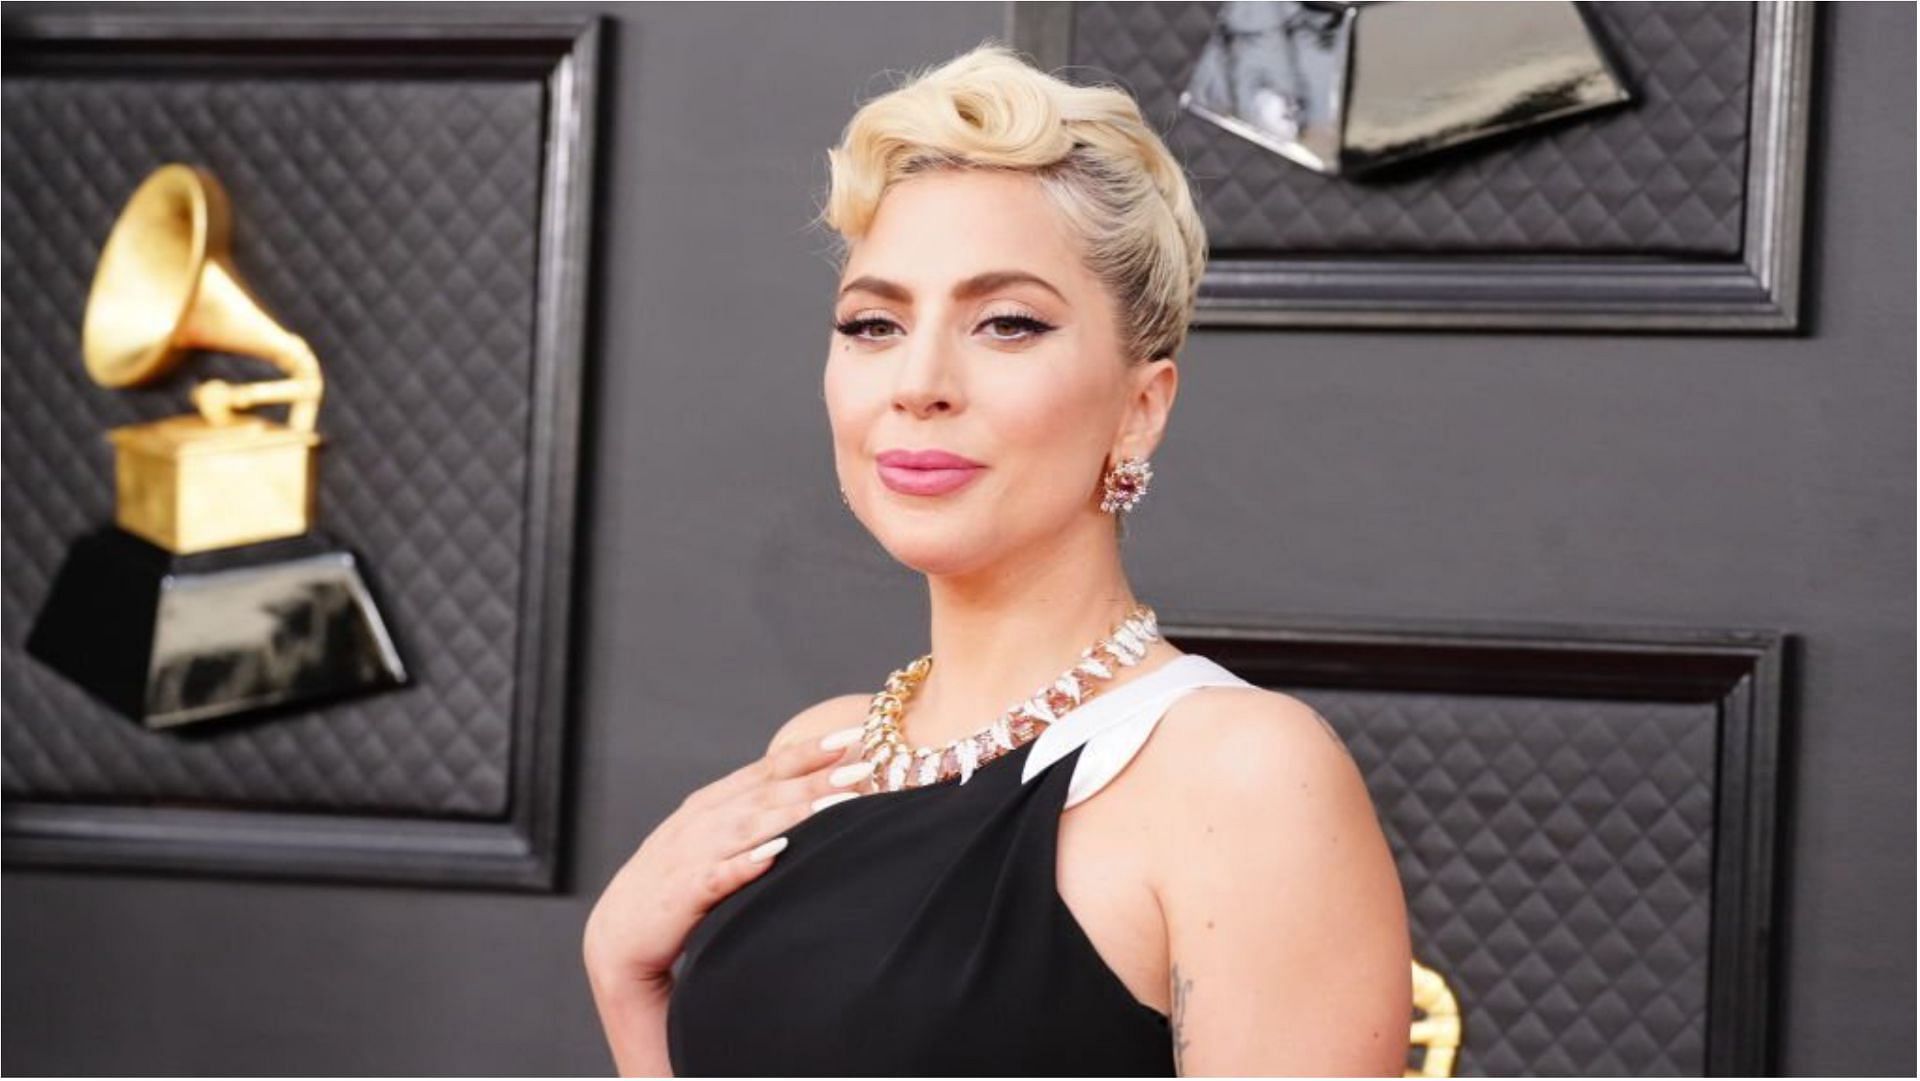 Lady Gaga&#039;s dogs were stolen at gunpoint in February 2021 (Image via Jeff Kravitz/Getty Images)